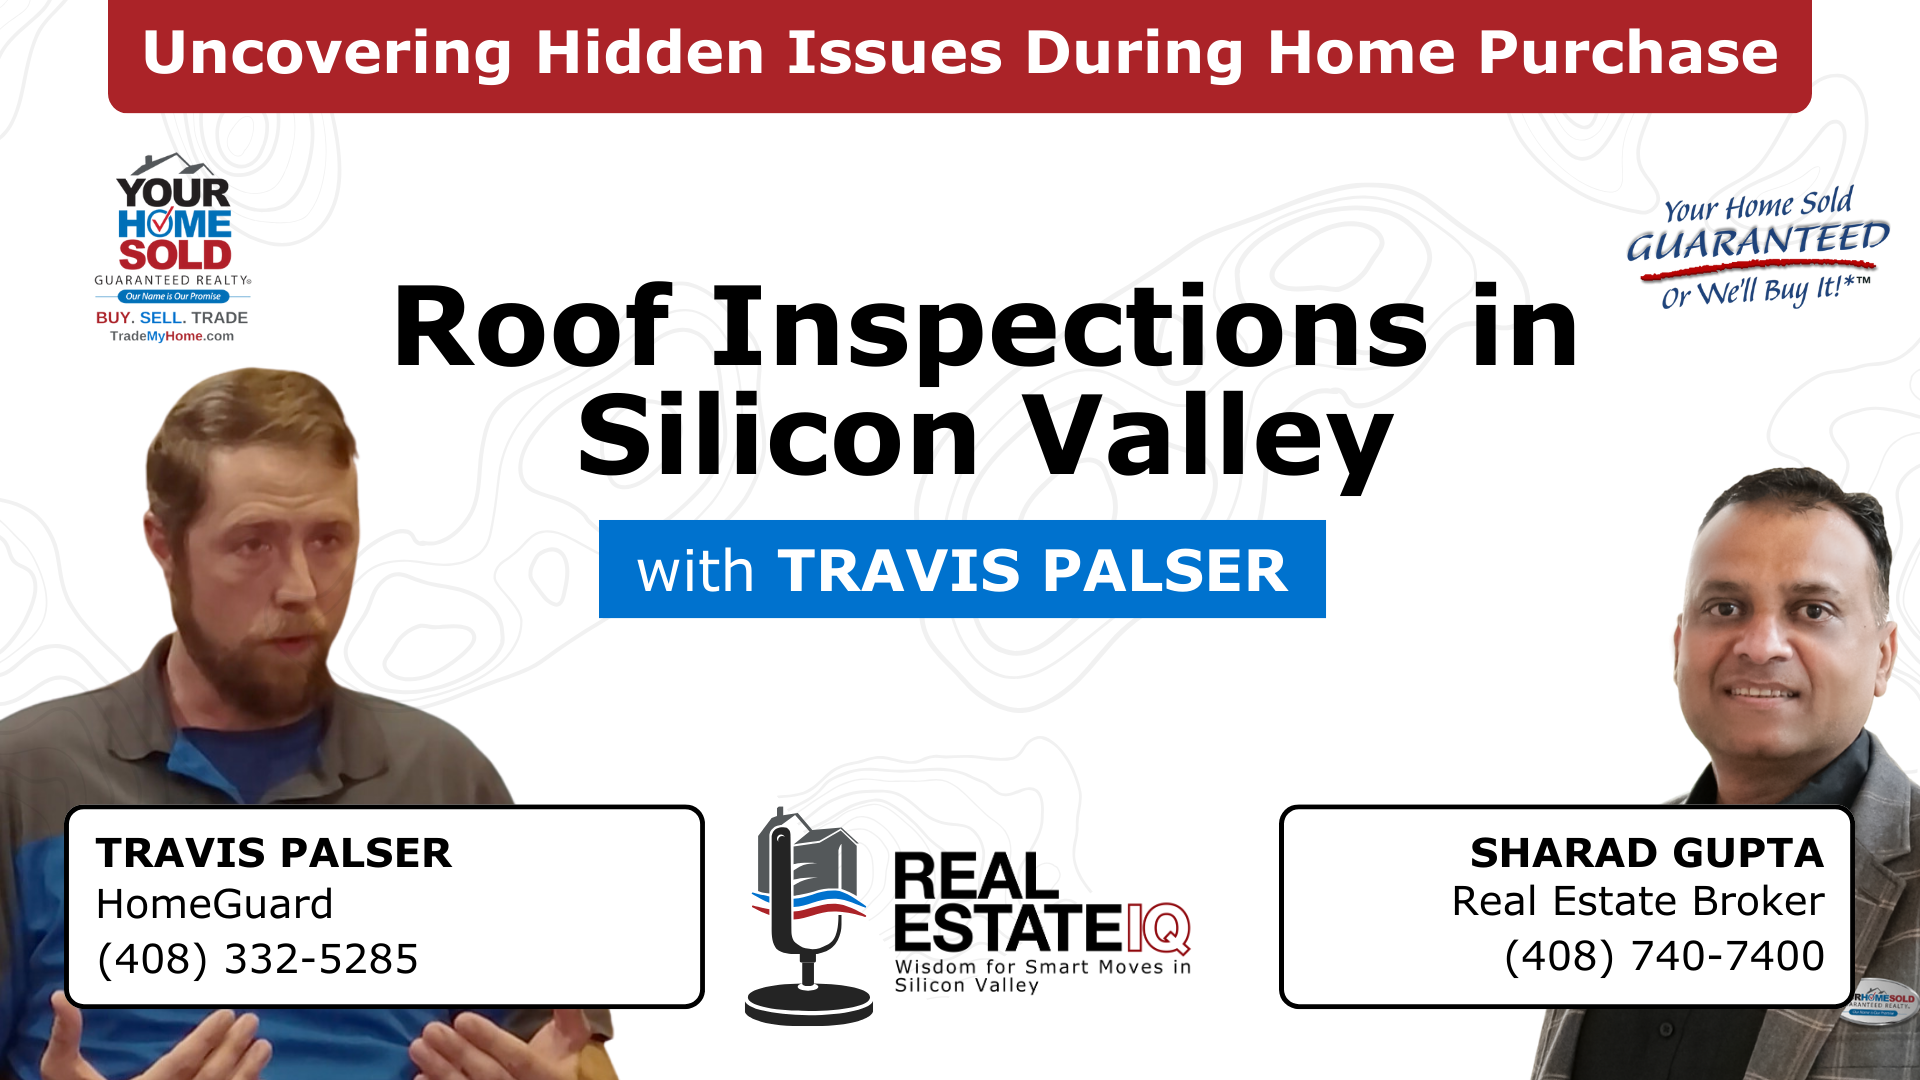 Roof Inspections: Uncovering Hidden Issues During Home Purchase in Silicon Valley Video